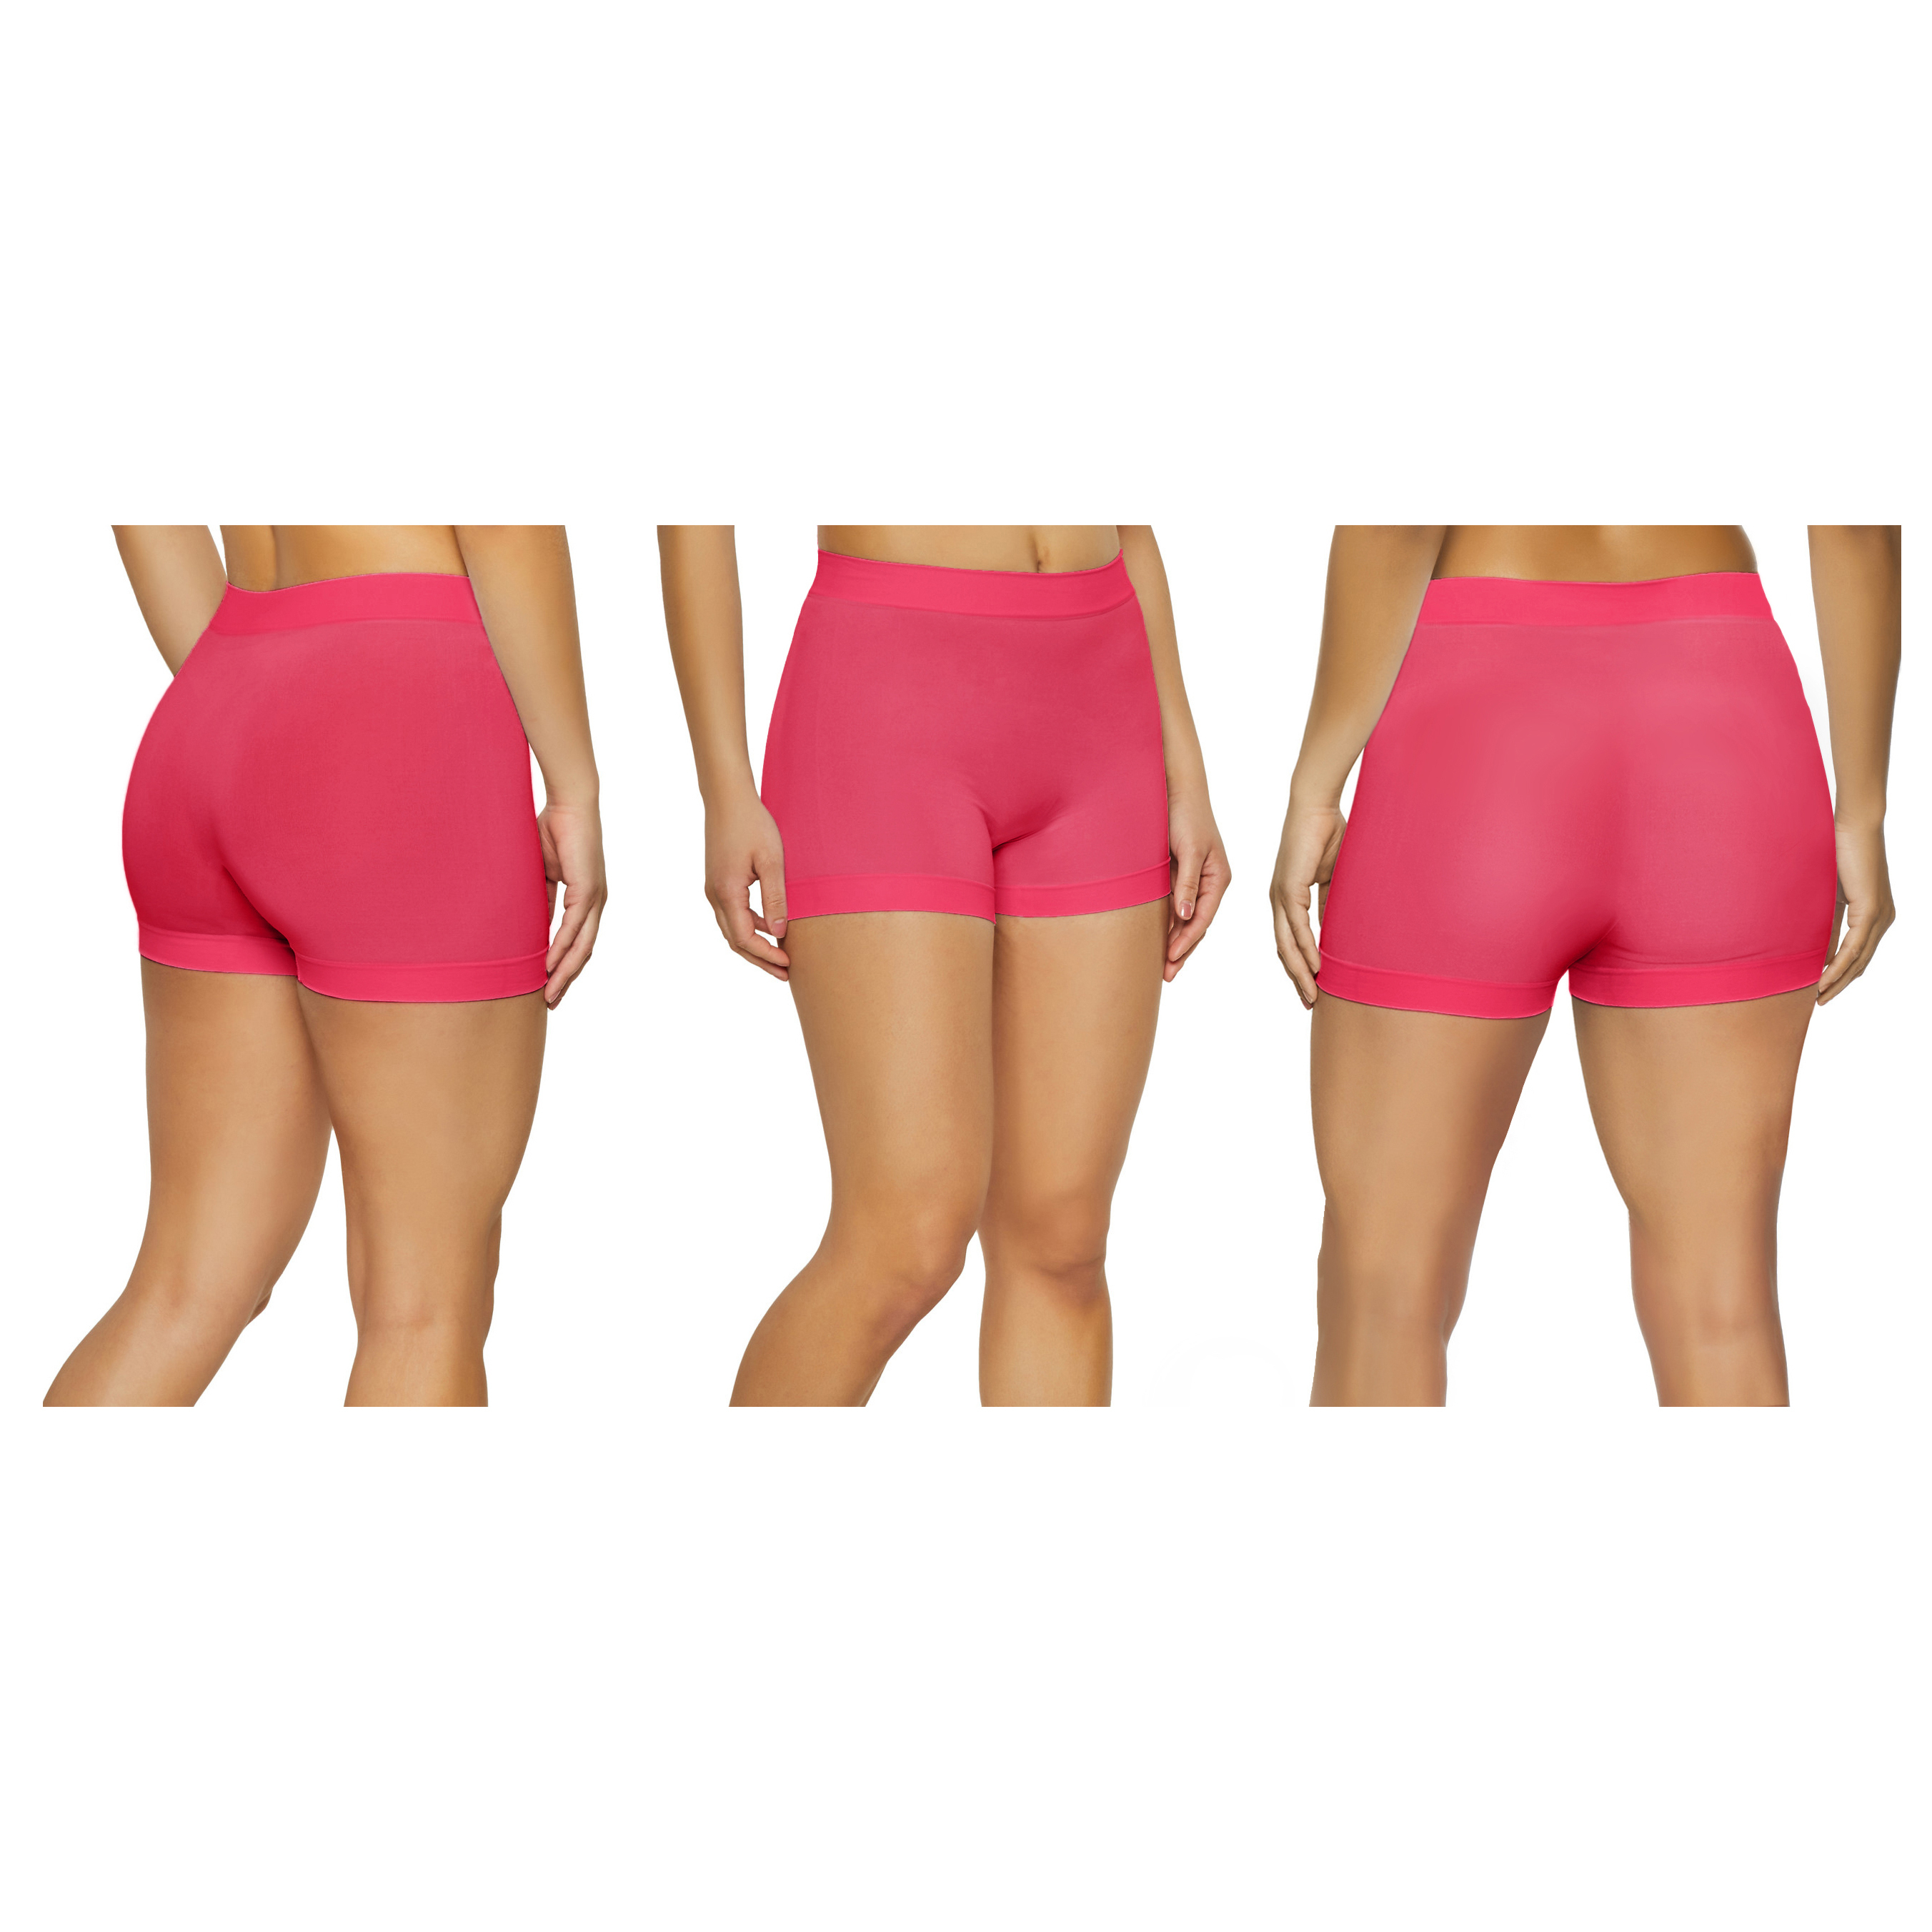 12-Pack Women's High Waisted Biker Bottom Shorts For Yoga Gym Running Ladies Pants - CORAL, M